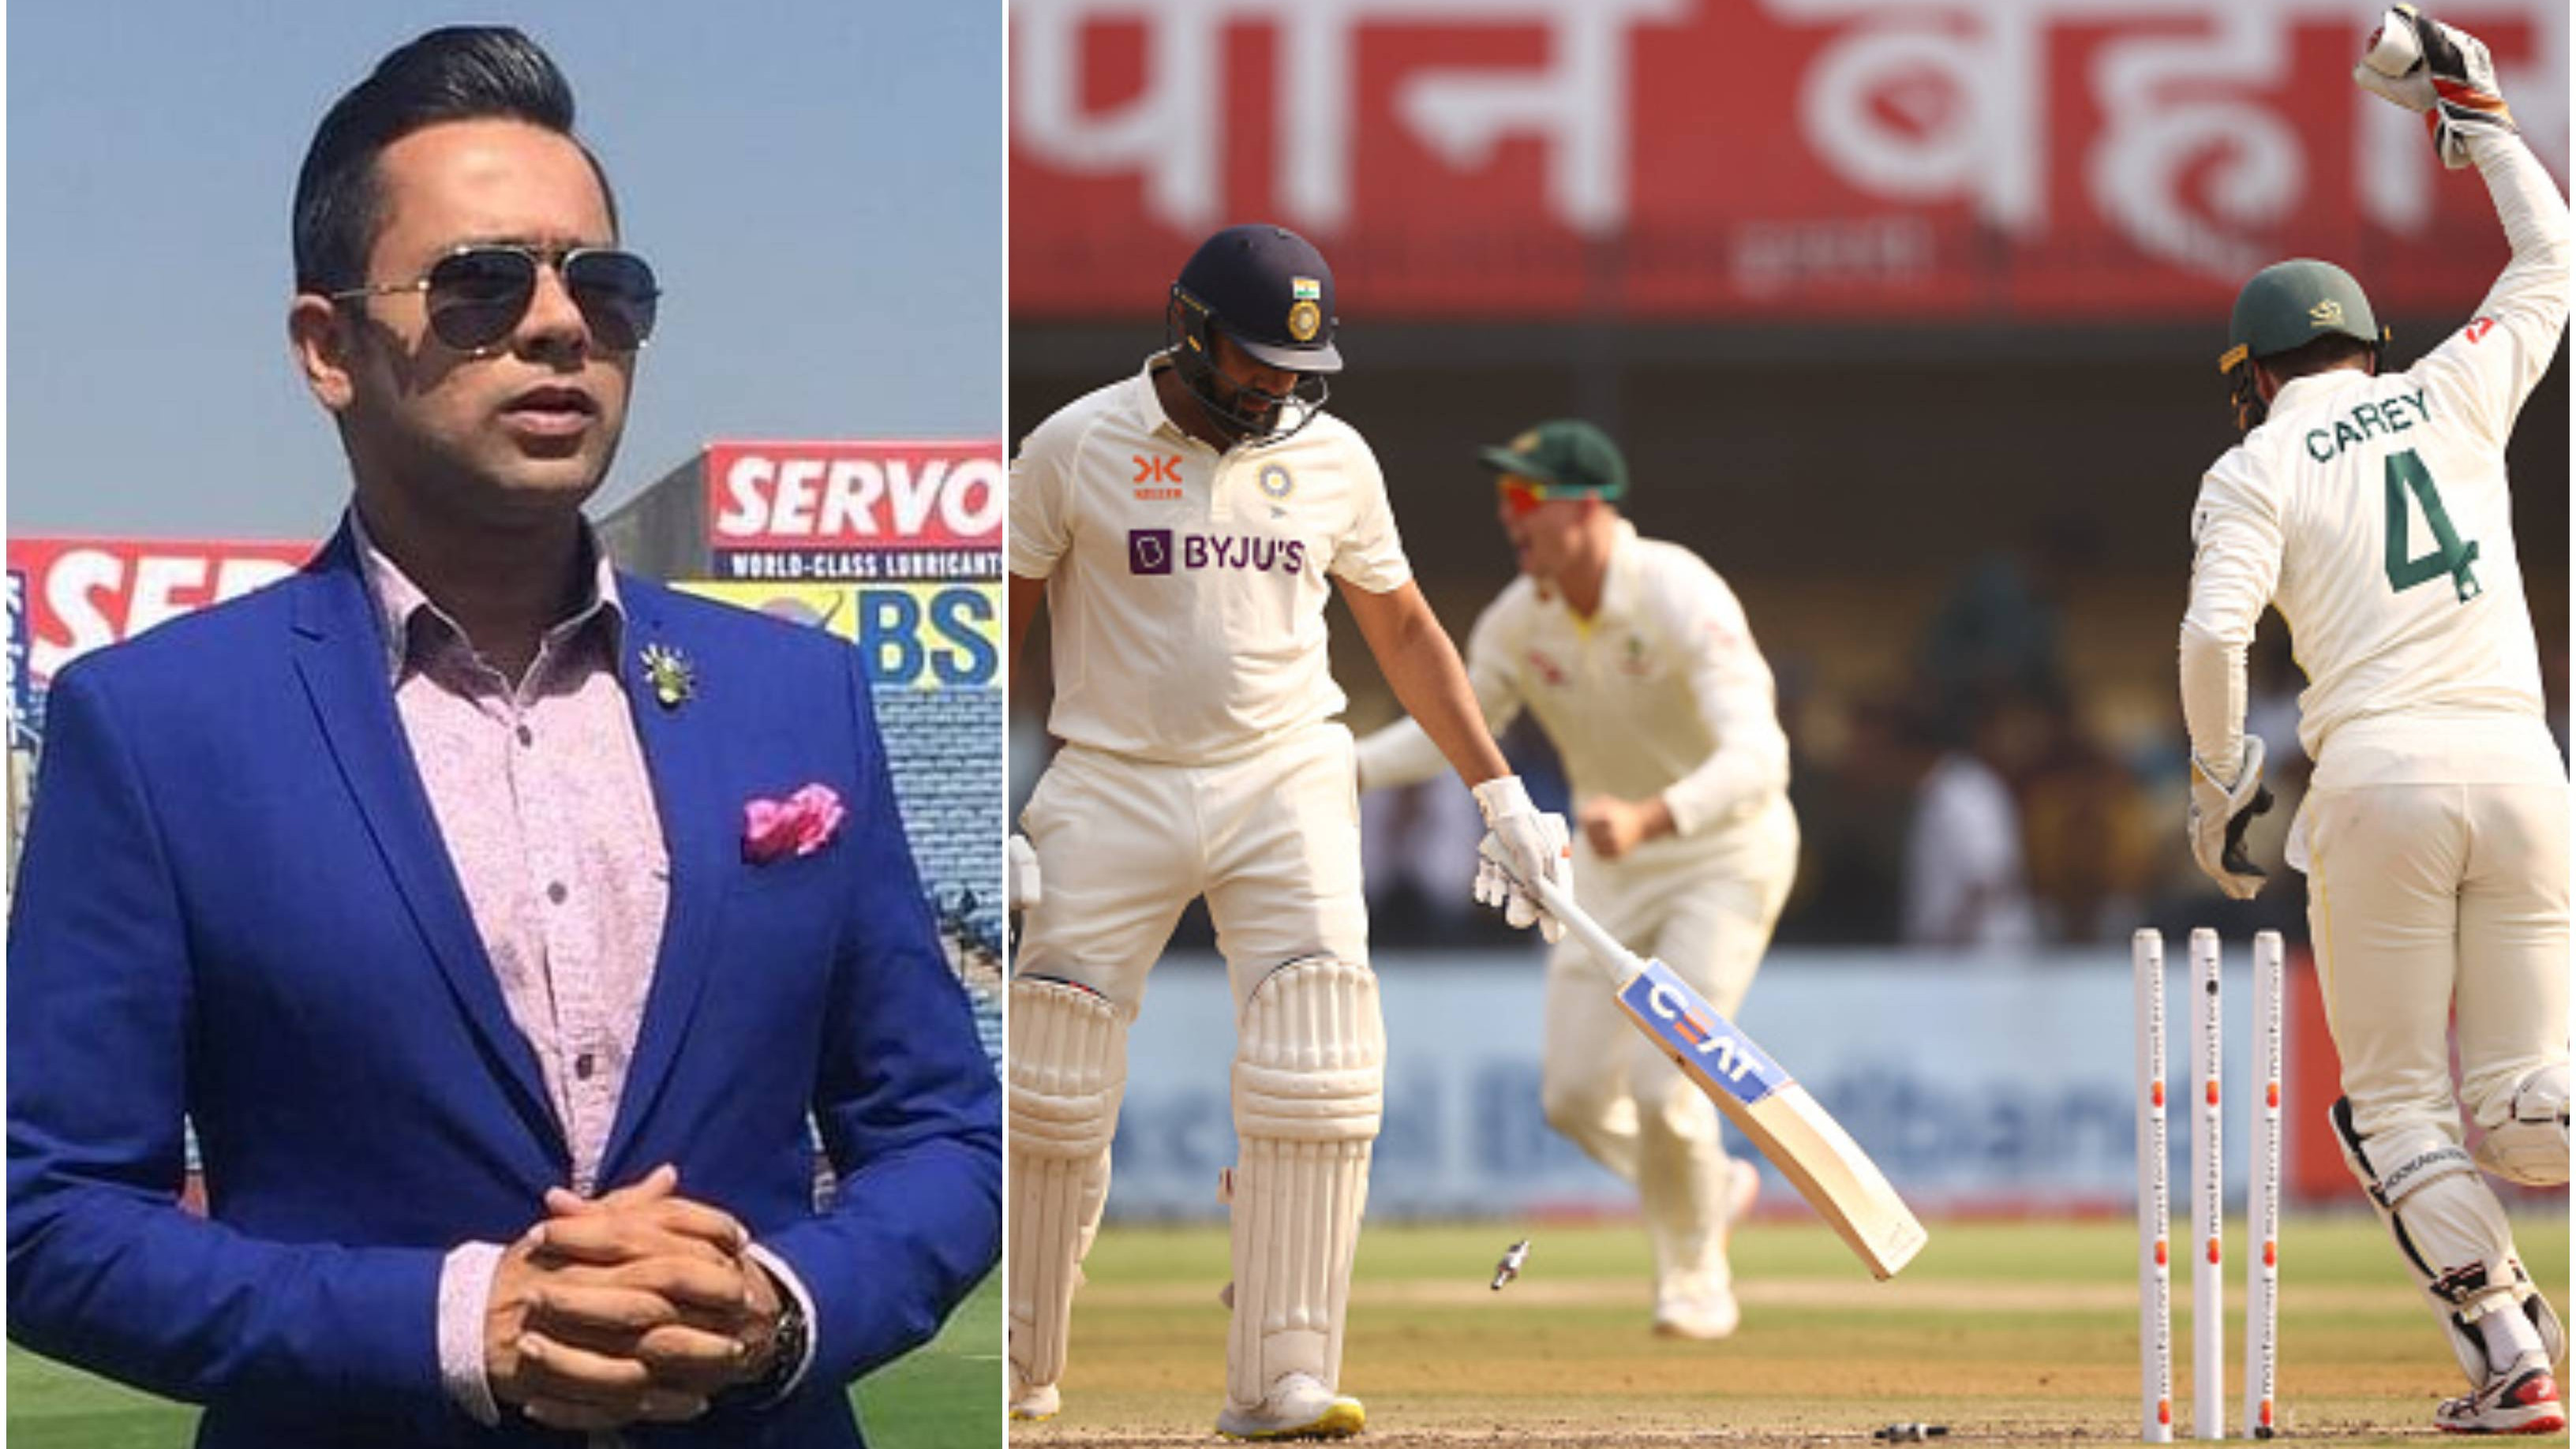 IND v AUS 2023: India’s play against spin has become extremely bad, says Aakash Chopra after Indore Test loss